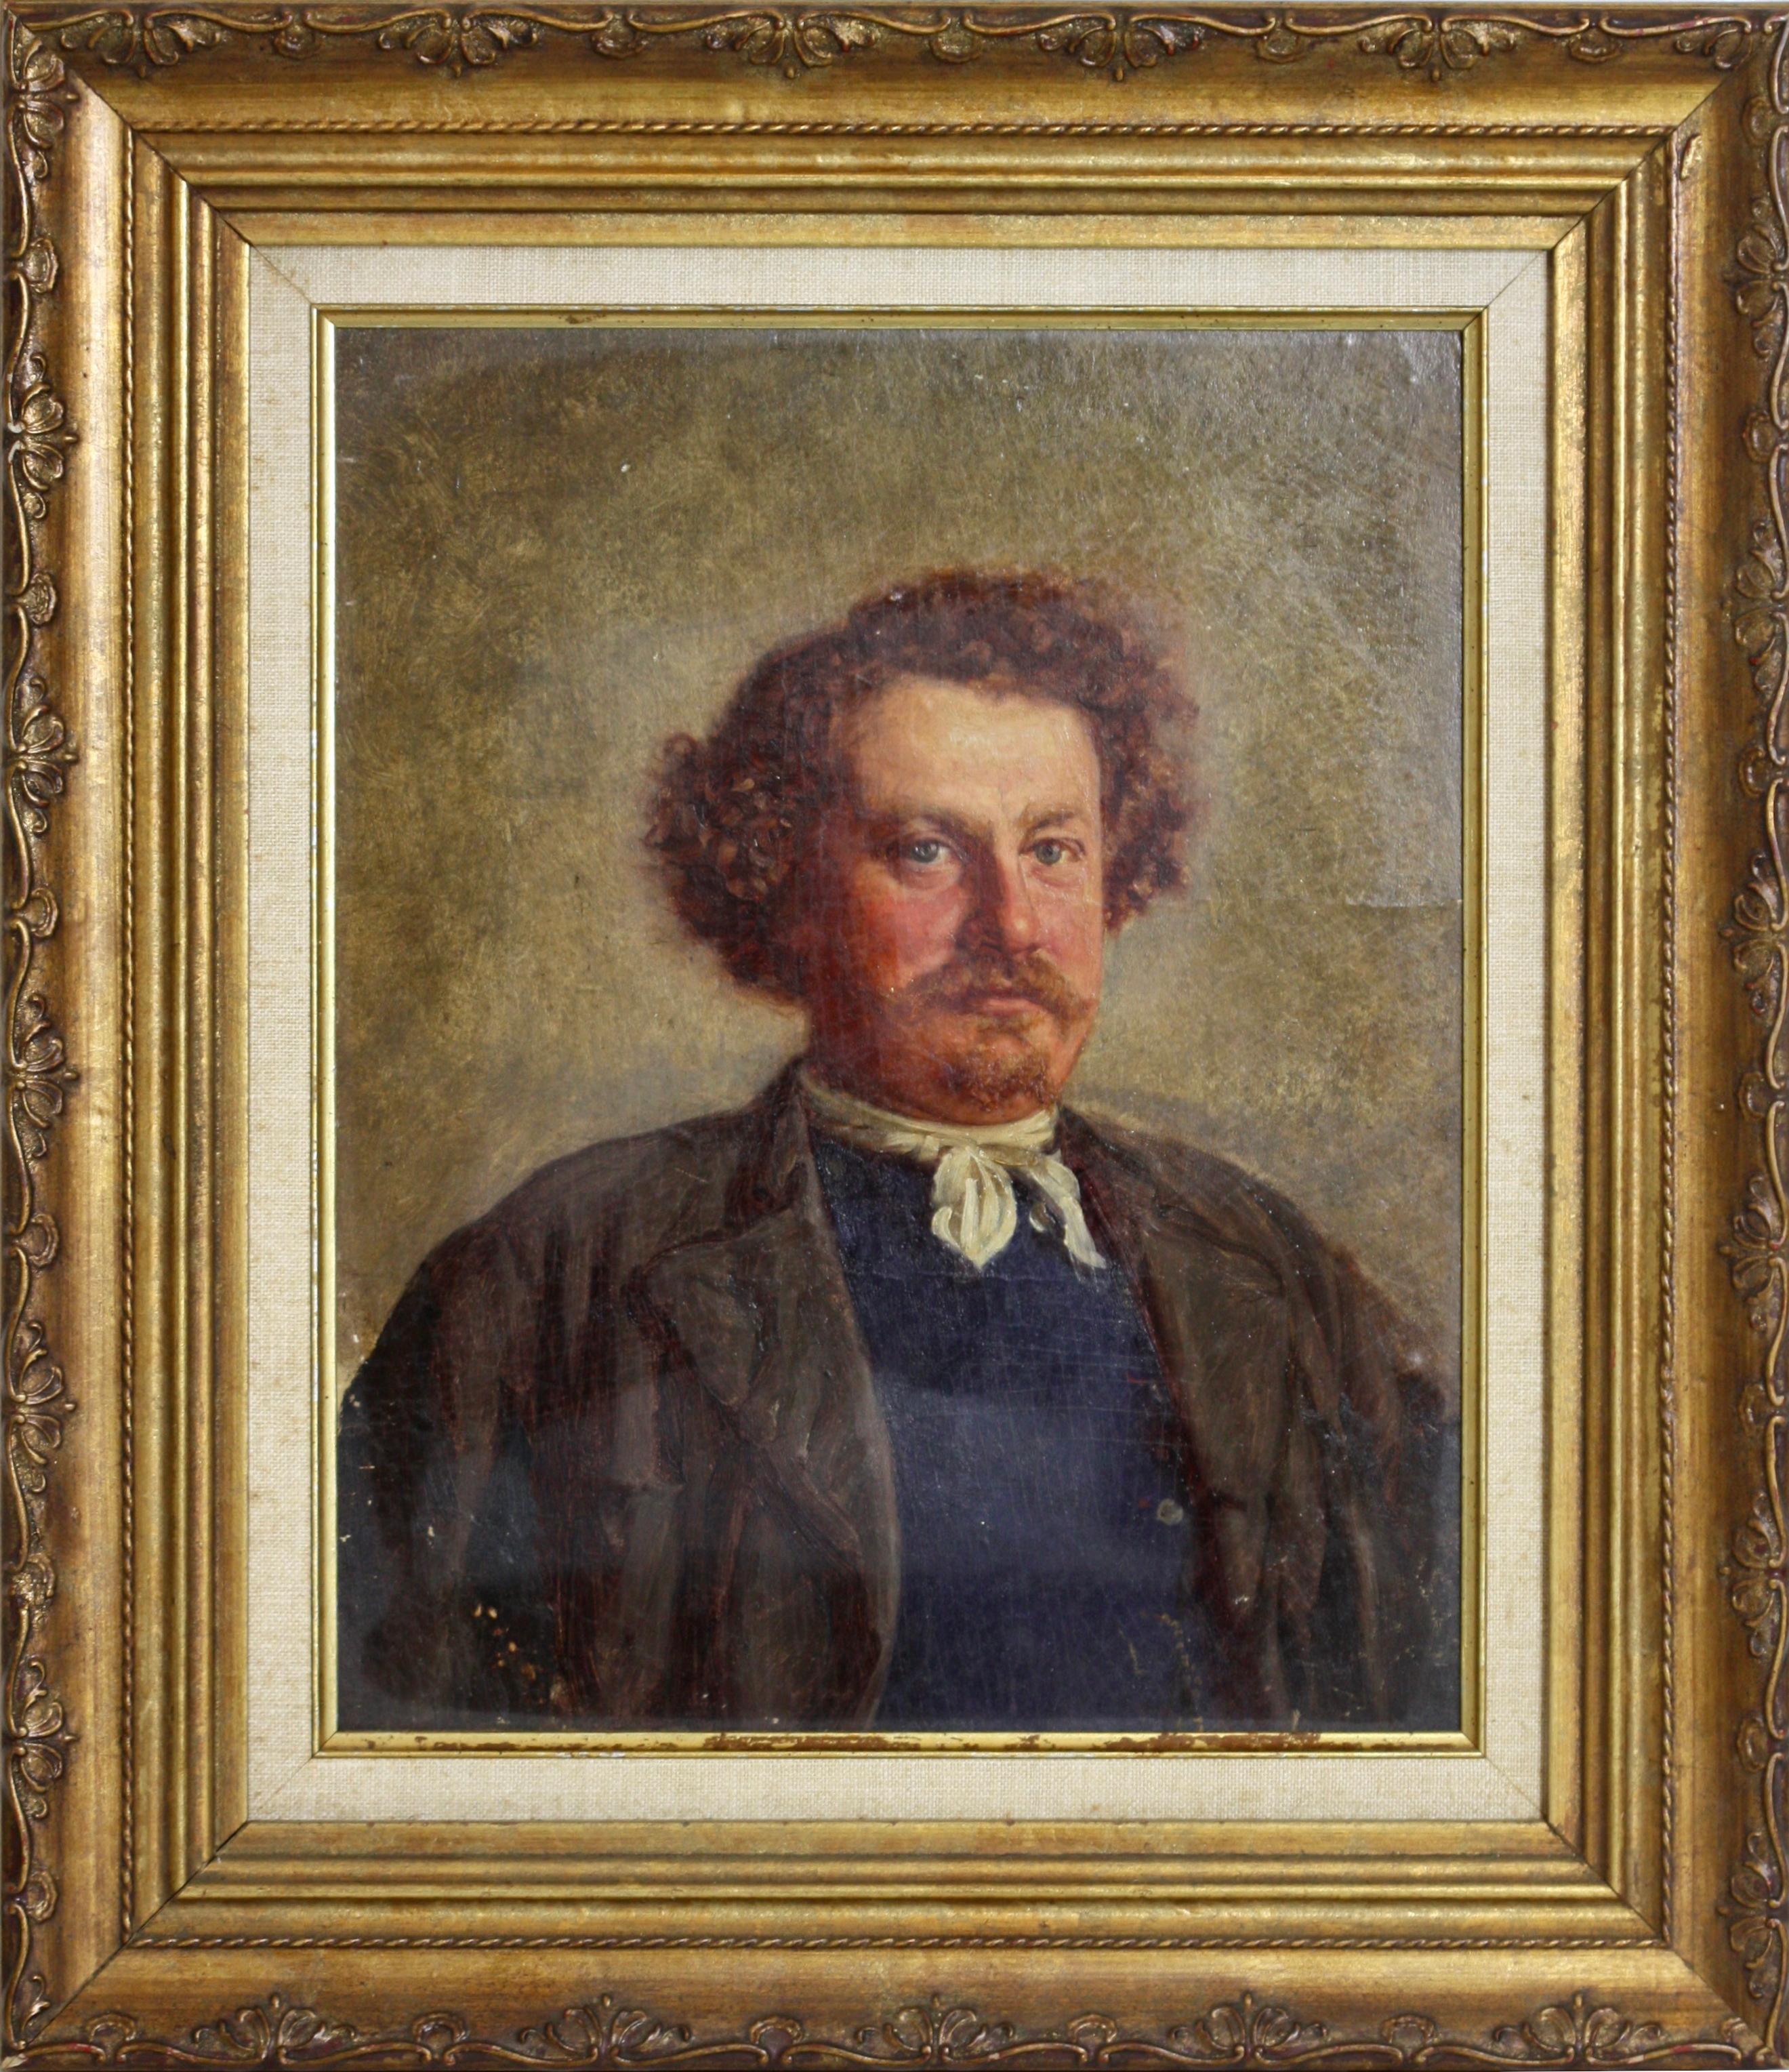 Continental School
20th Century
Portrait of A Gentleman
Oil on board
Size With Frame: 14 x 16.5 in. (35.56 x 41.91 cm.).
 